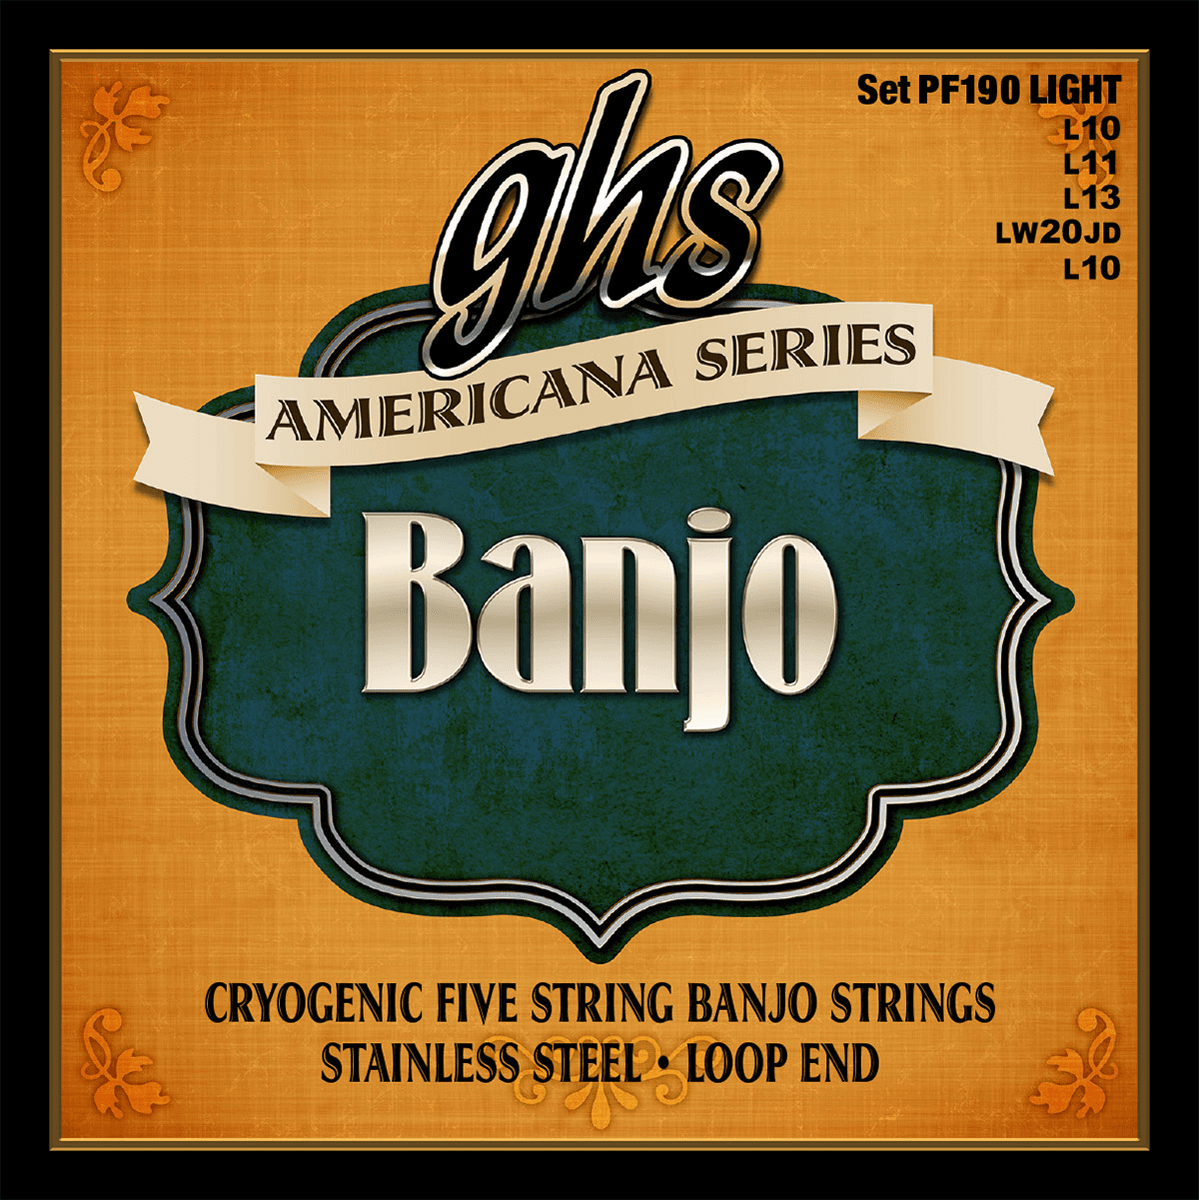 AMERICANA SERIES BANJO - Cryogenically Treated Stainless Steel, Light